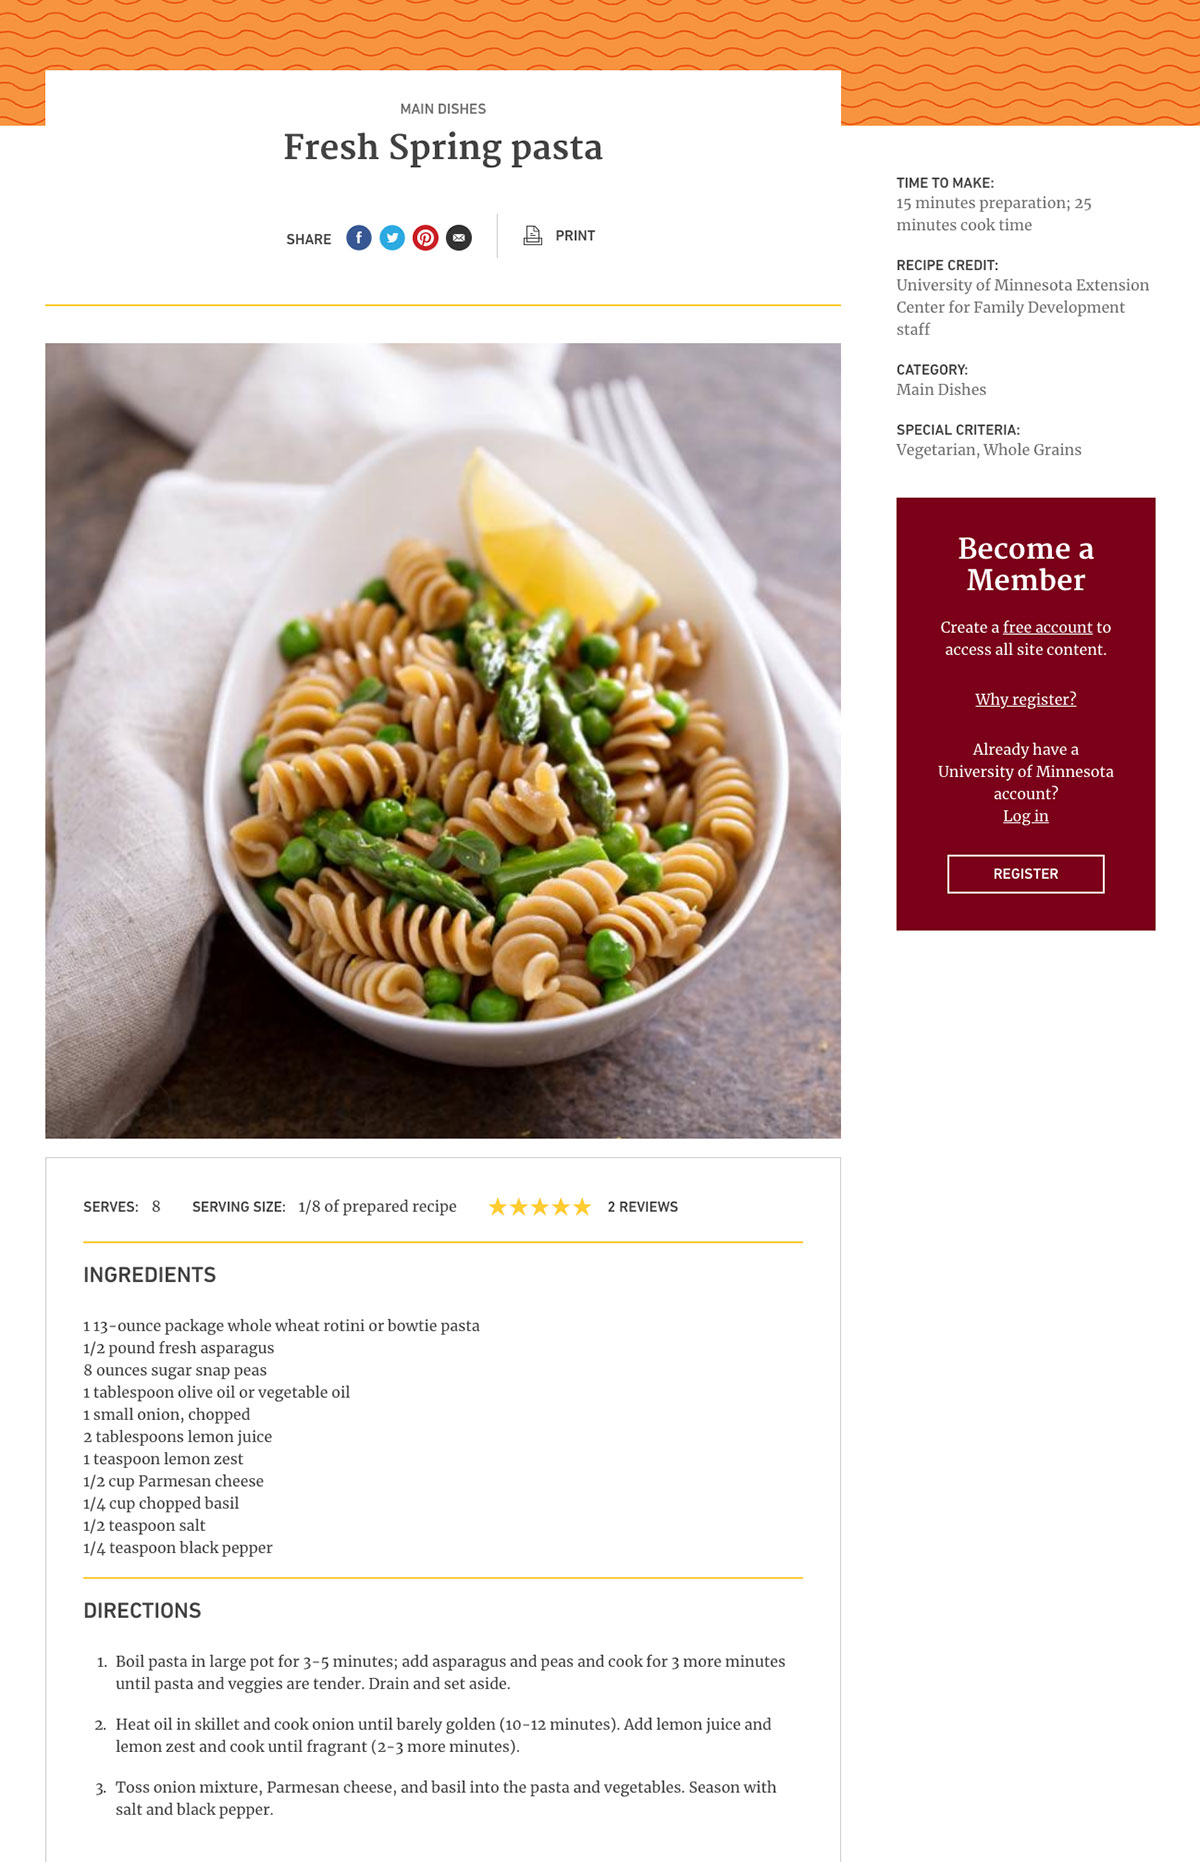 screenshot of an individual recipe page, with an image of a pasta dish and some directions